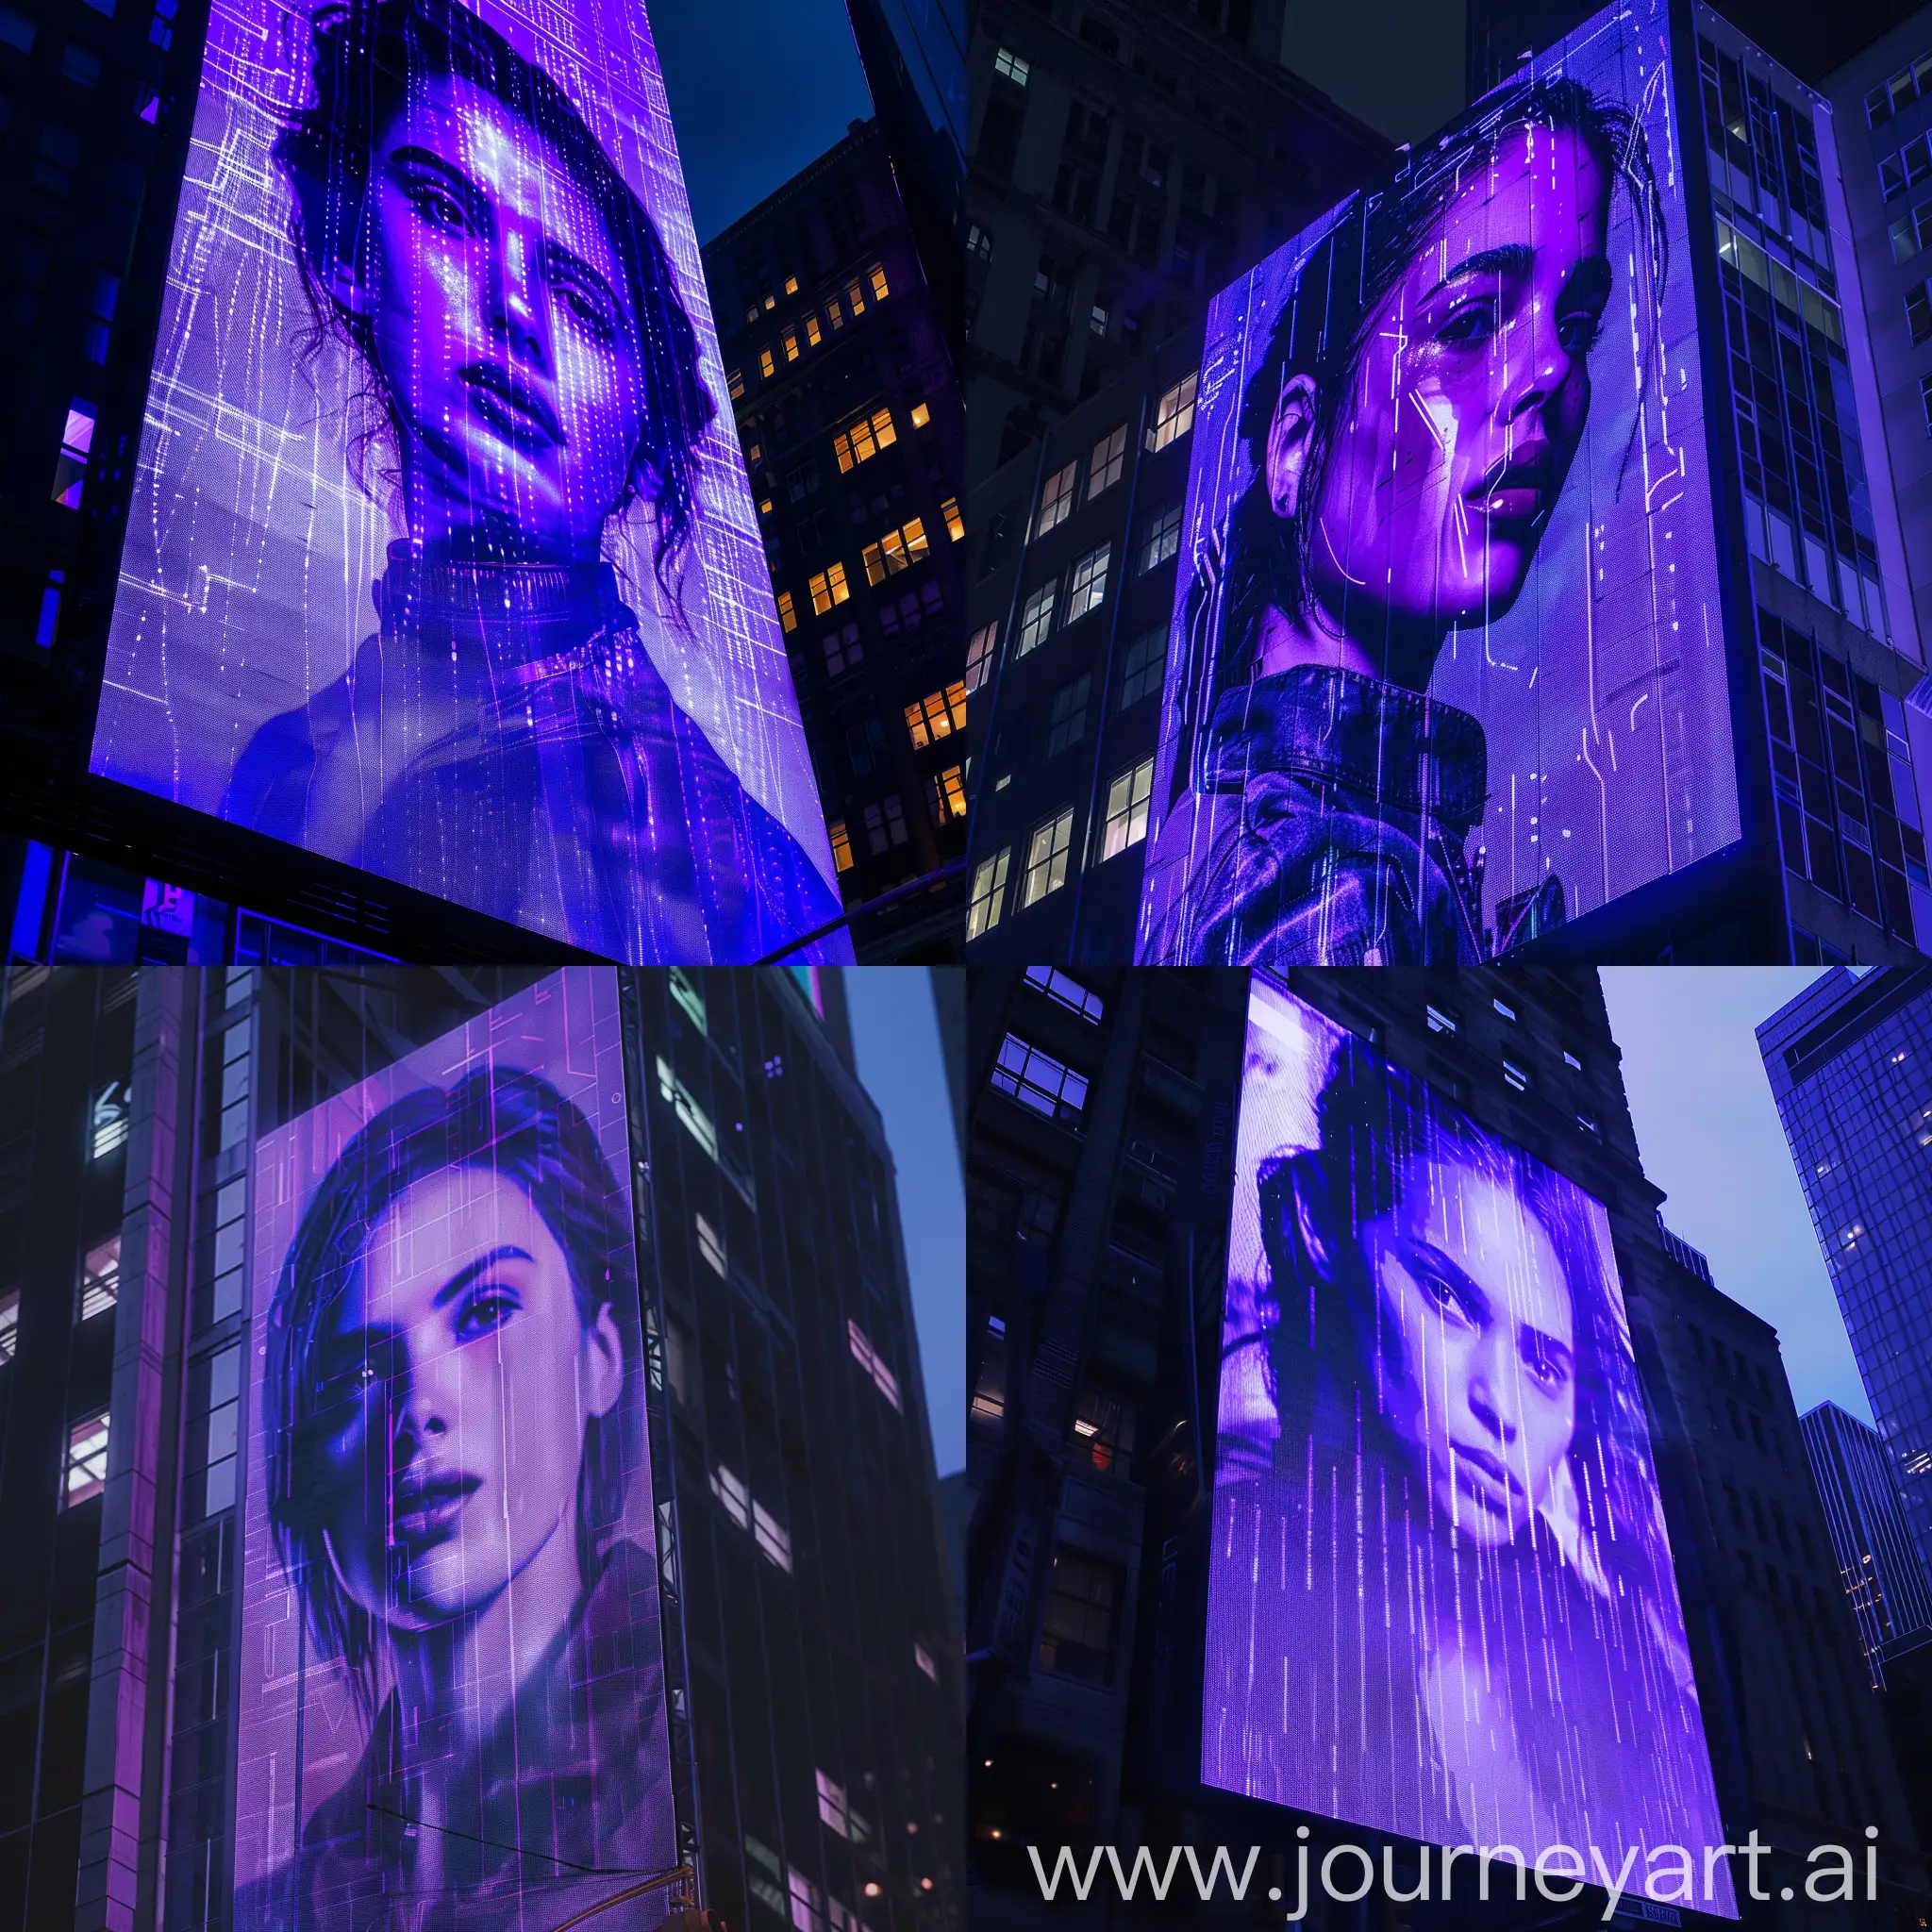 a purple blue holographic billboard of a woman , night time, style raw, futuristic, close up, city, year 2049, new york city, natural lighting, dystopian,

